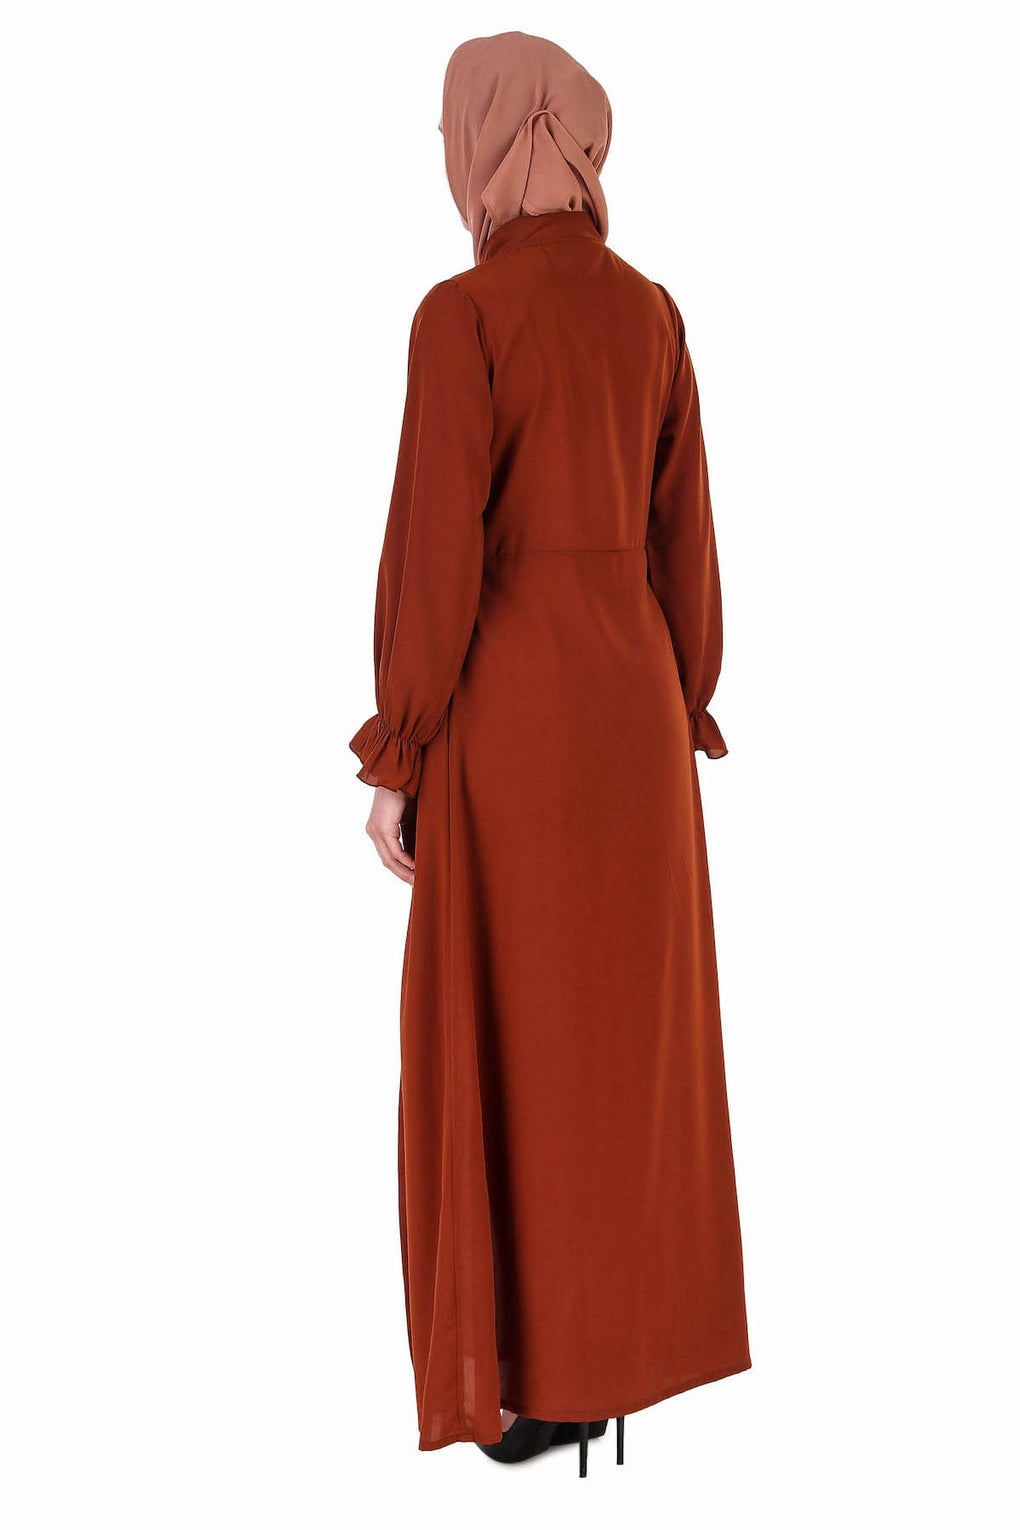 Fancy Dual Color Attached Long Shrug Abaya